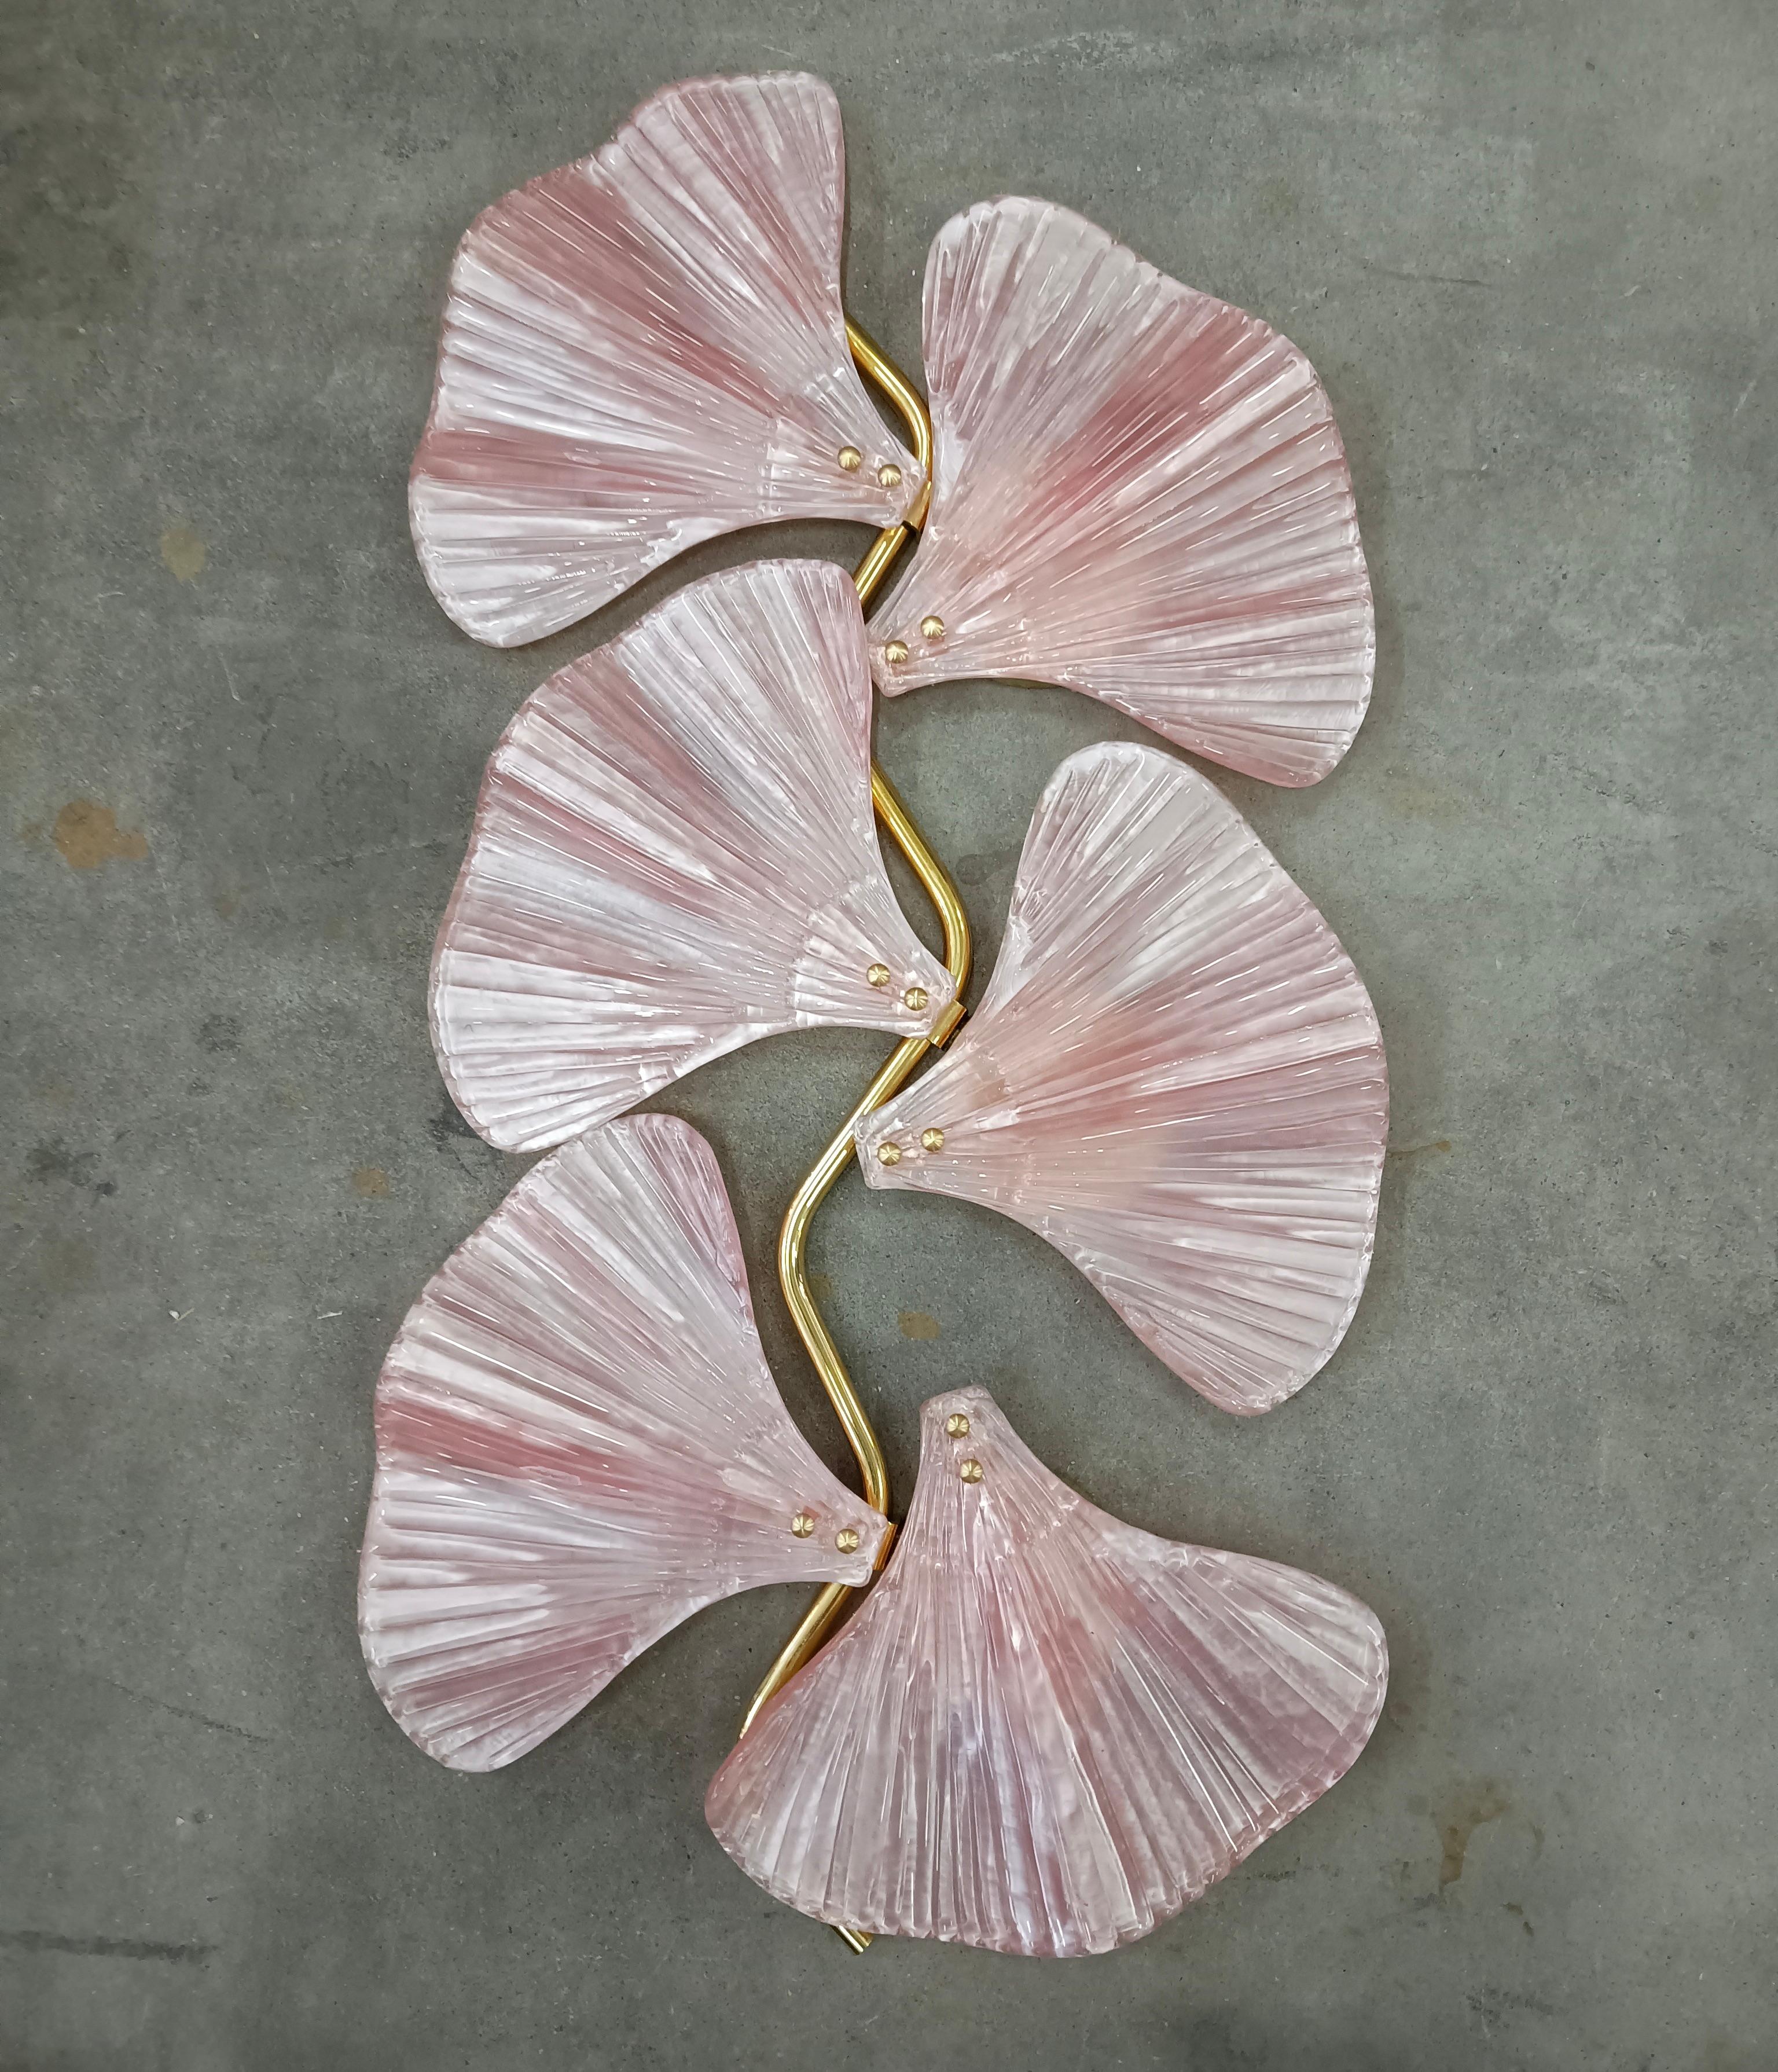 This bewitching narrow and long wall lamp was made entirely by hand in Murano. Every single leaf is made individually by hand in high quality blown glass in Murano; which is why each leaf is slightly different from the next. Exhilarating color, rich